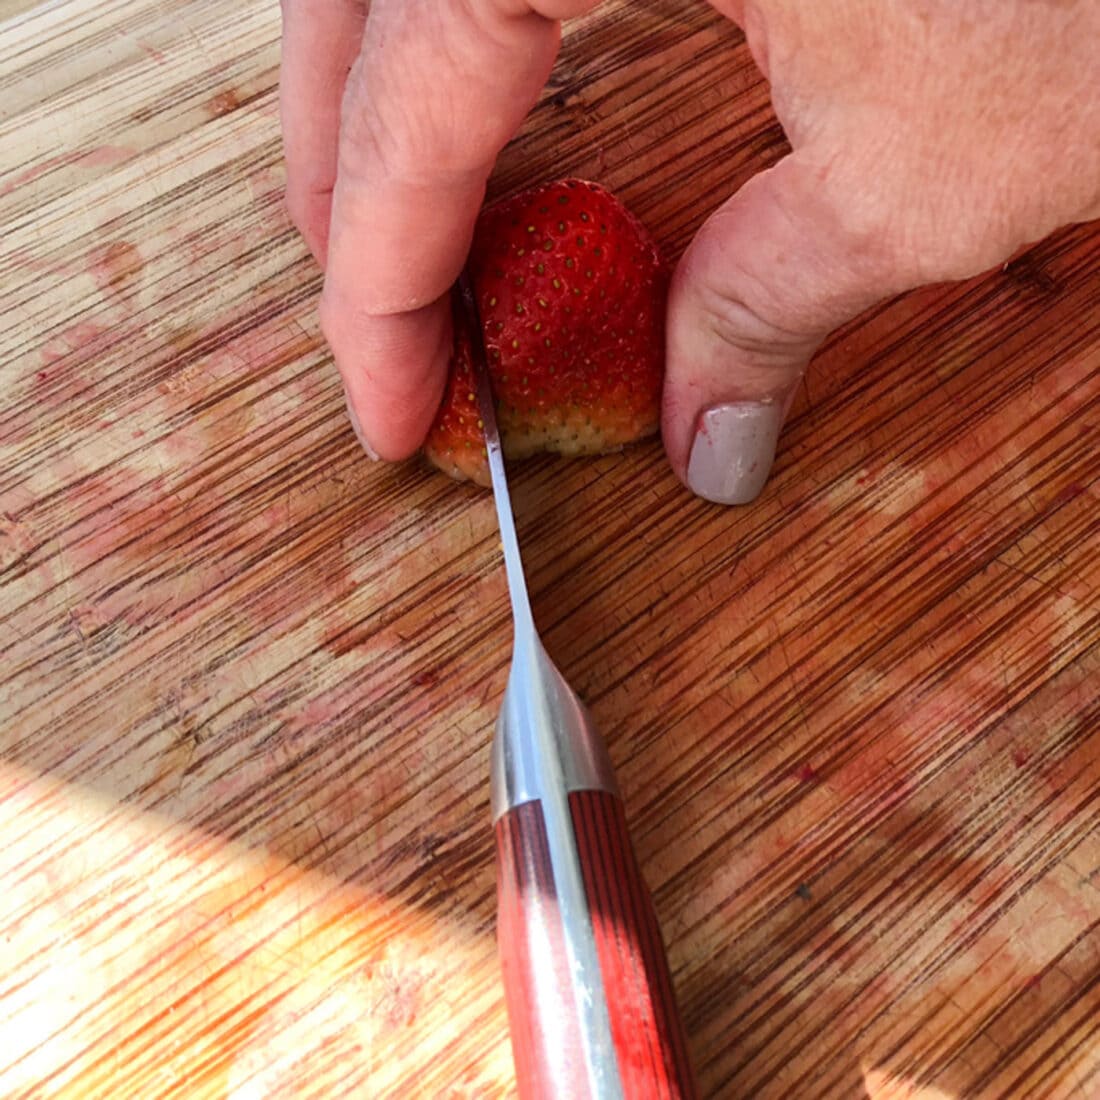 Strawberry being cut into slices